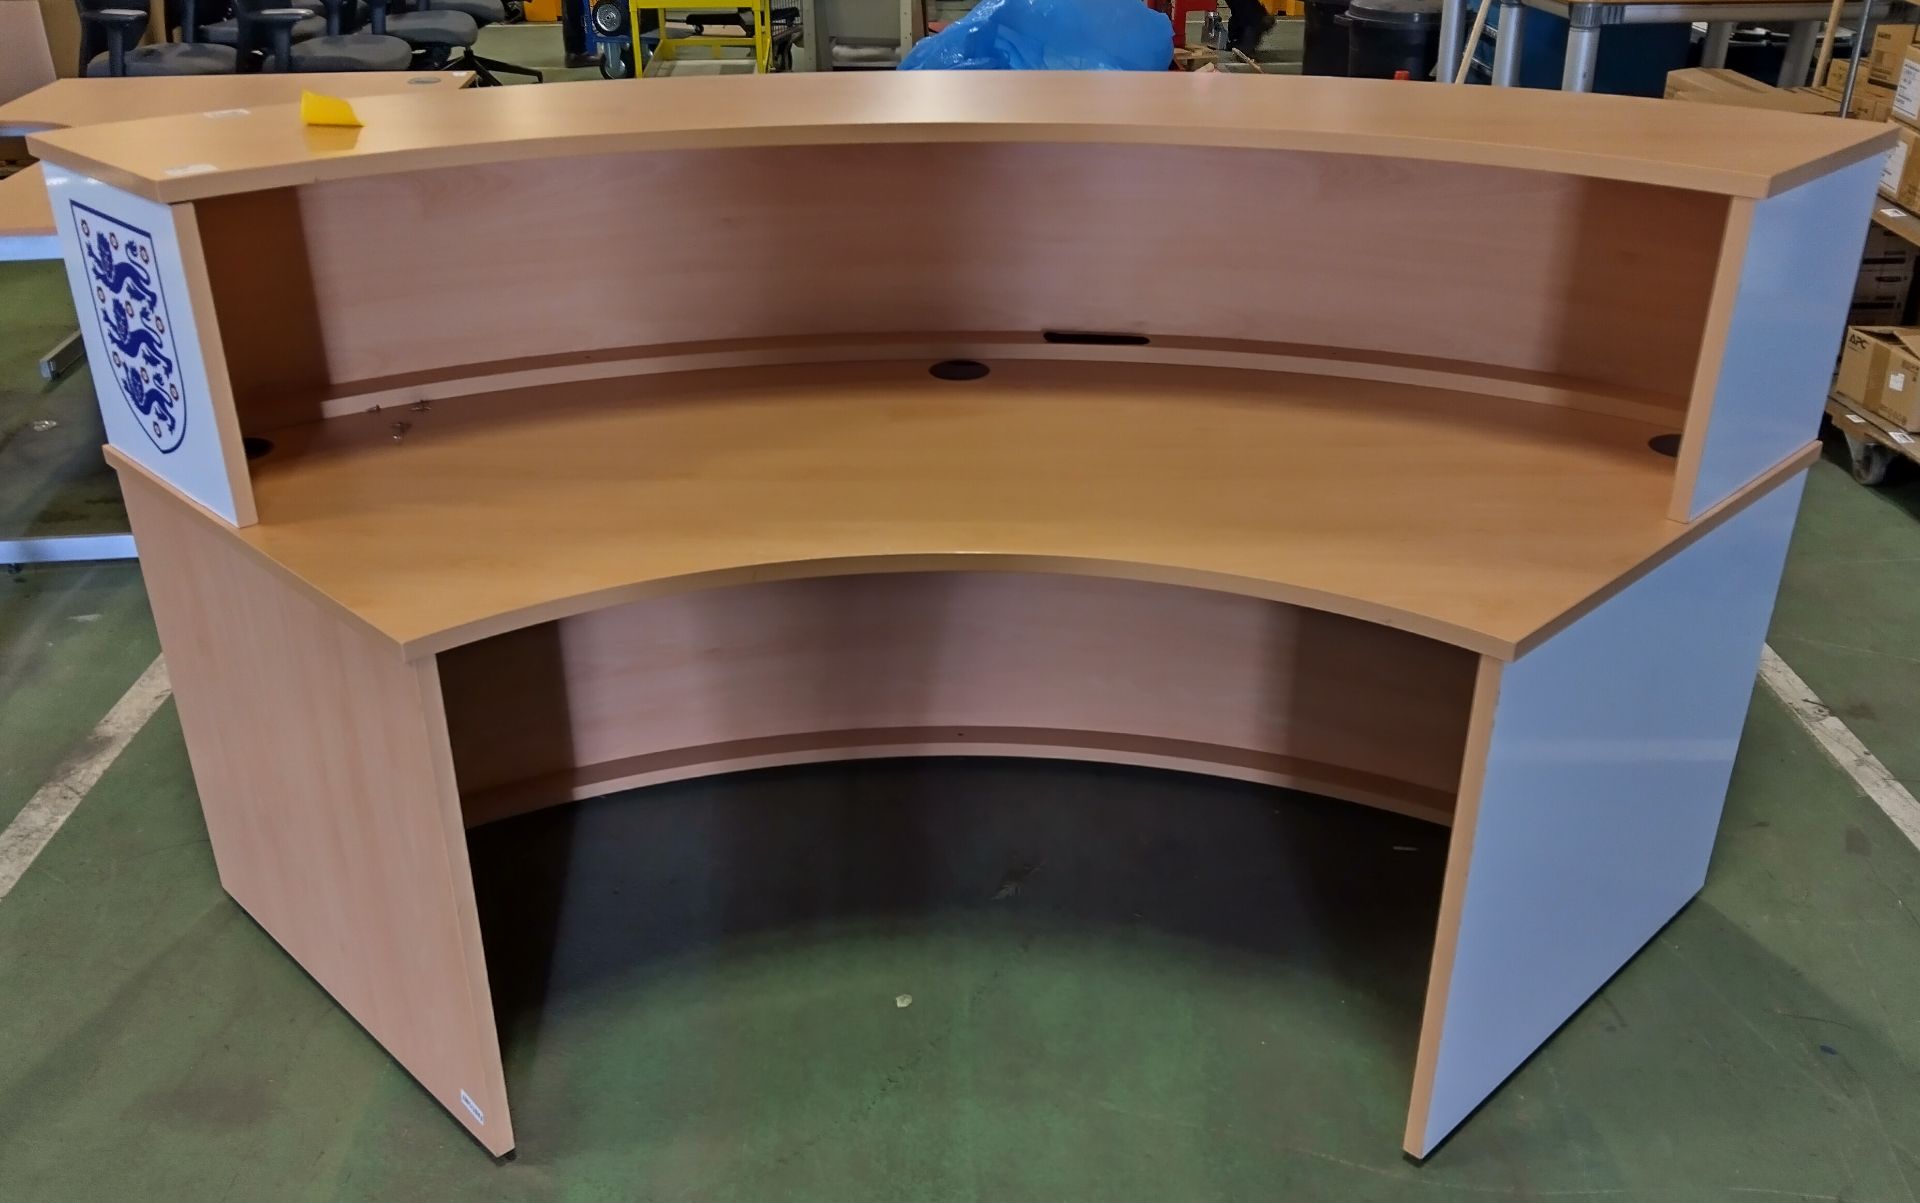 Large curved wooden reception desk - L 226 x W 82 x H 113 (Highest point) - Image 2 of 2